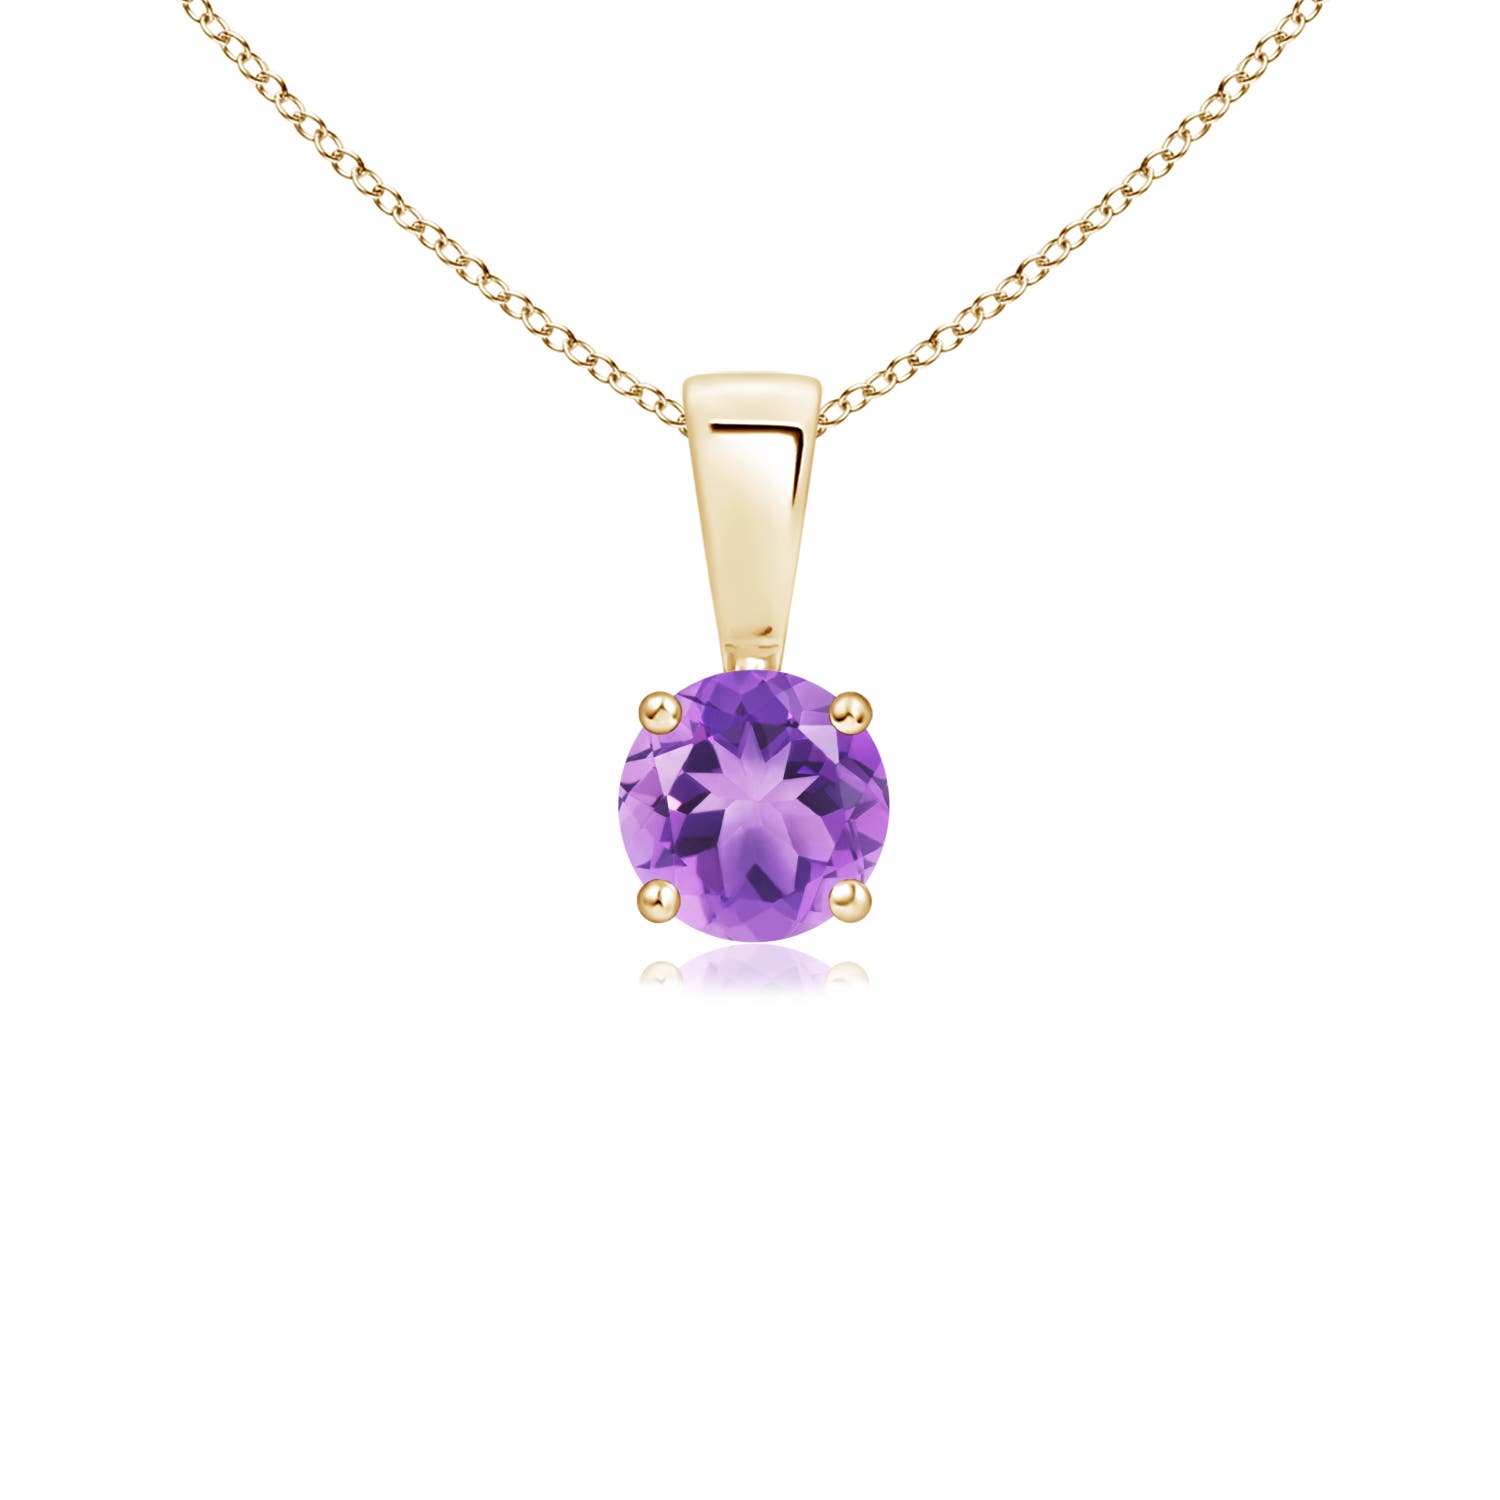 A - Amethyst / 0.25 CT / 14 KT Yellow Gold